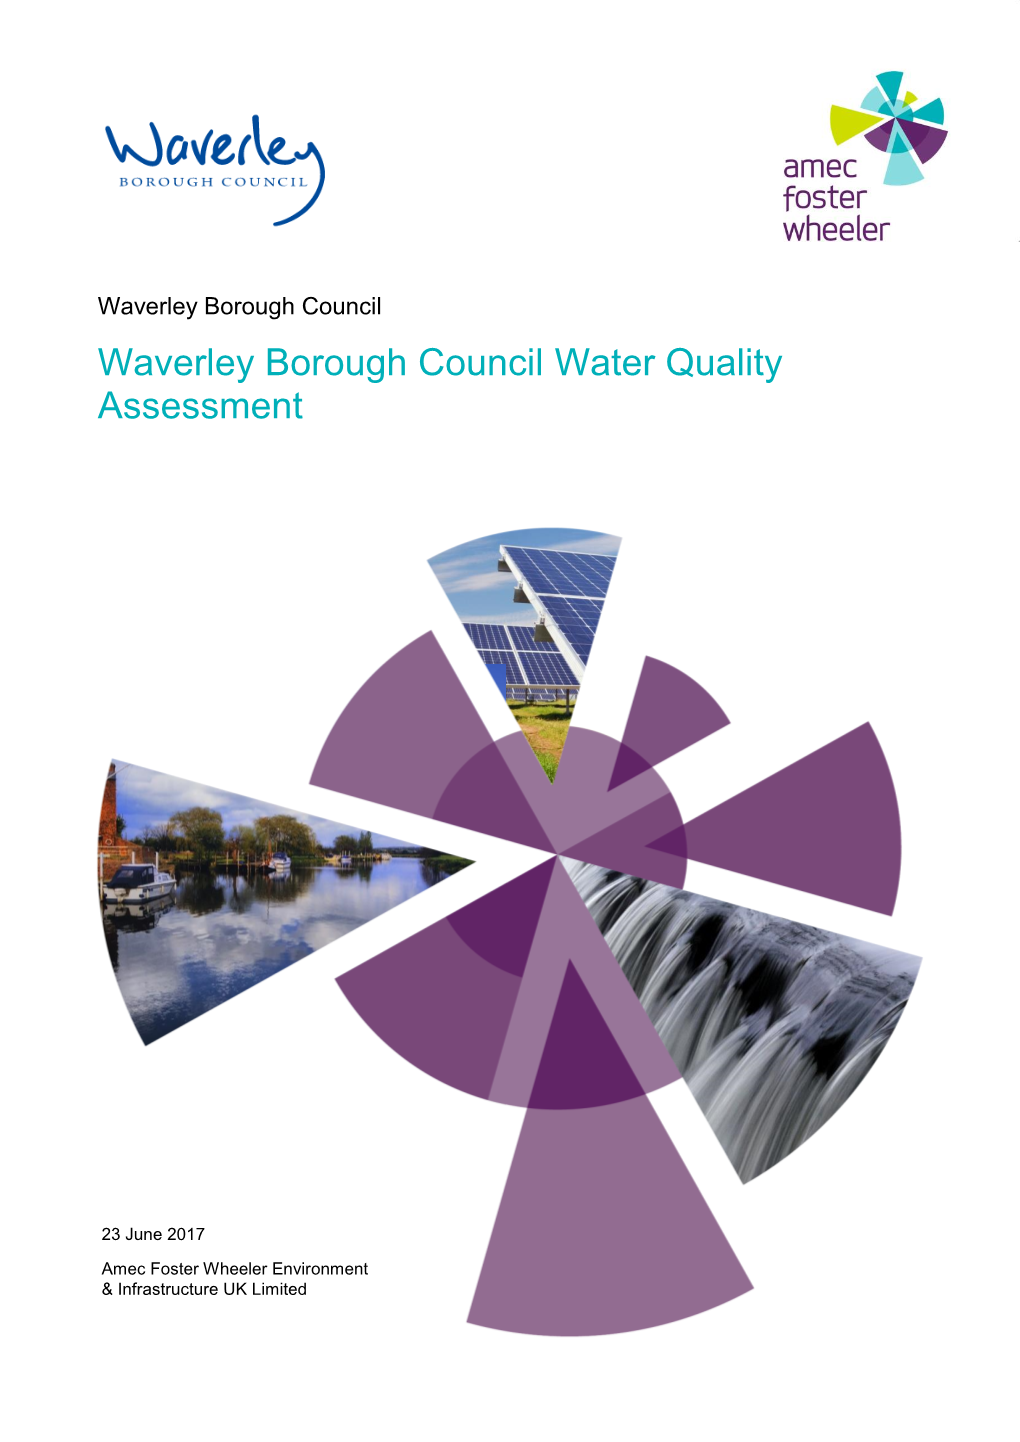 Waverley Borough Council Water Quality Assessment